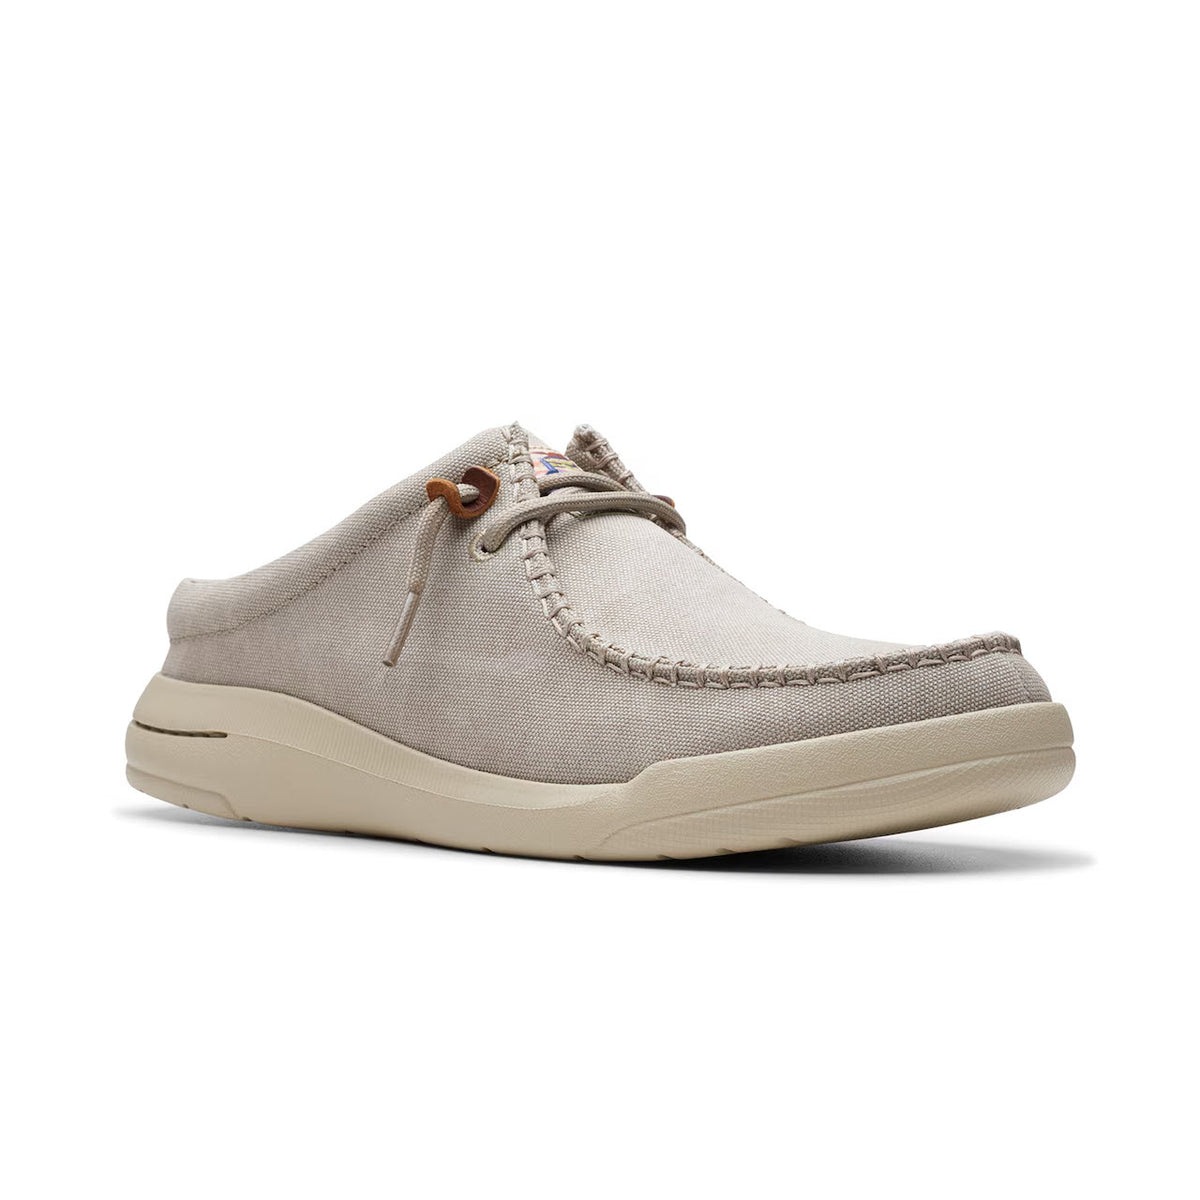 A single Clarks Driftlite Surf Slip On Moc Light Grey Textured - Mens boat shoe with brown laces and an Extreme Comfort foam footbed, displayed against a white background.